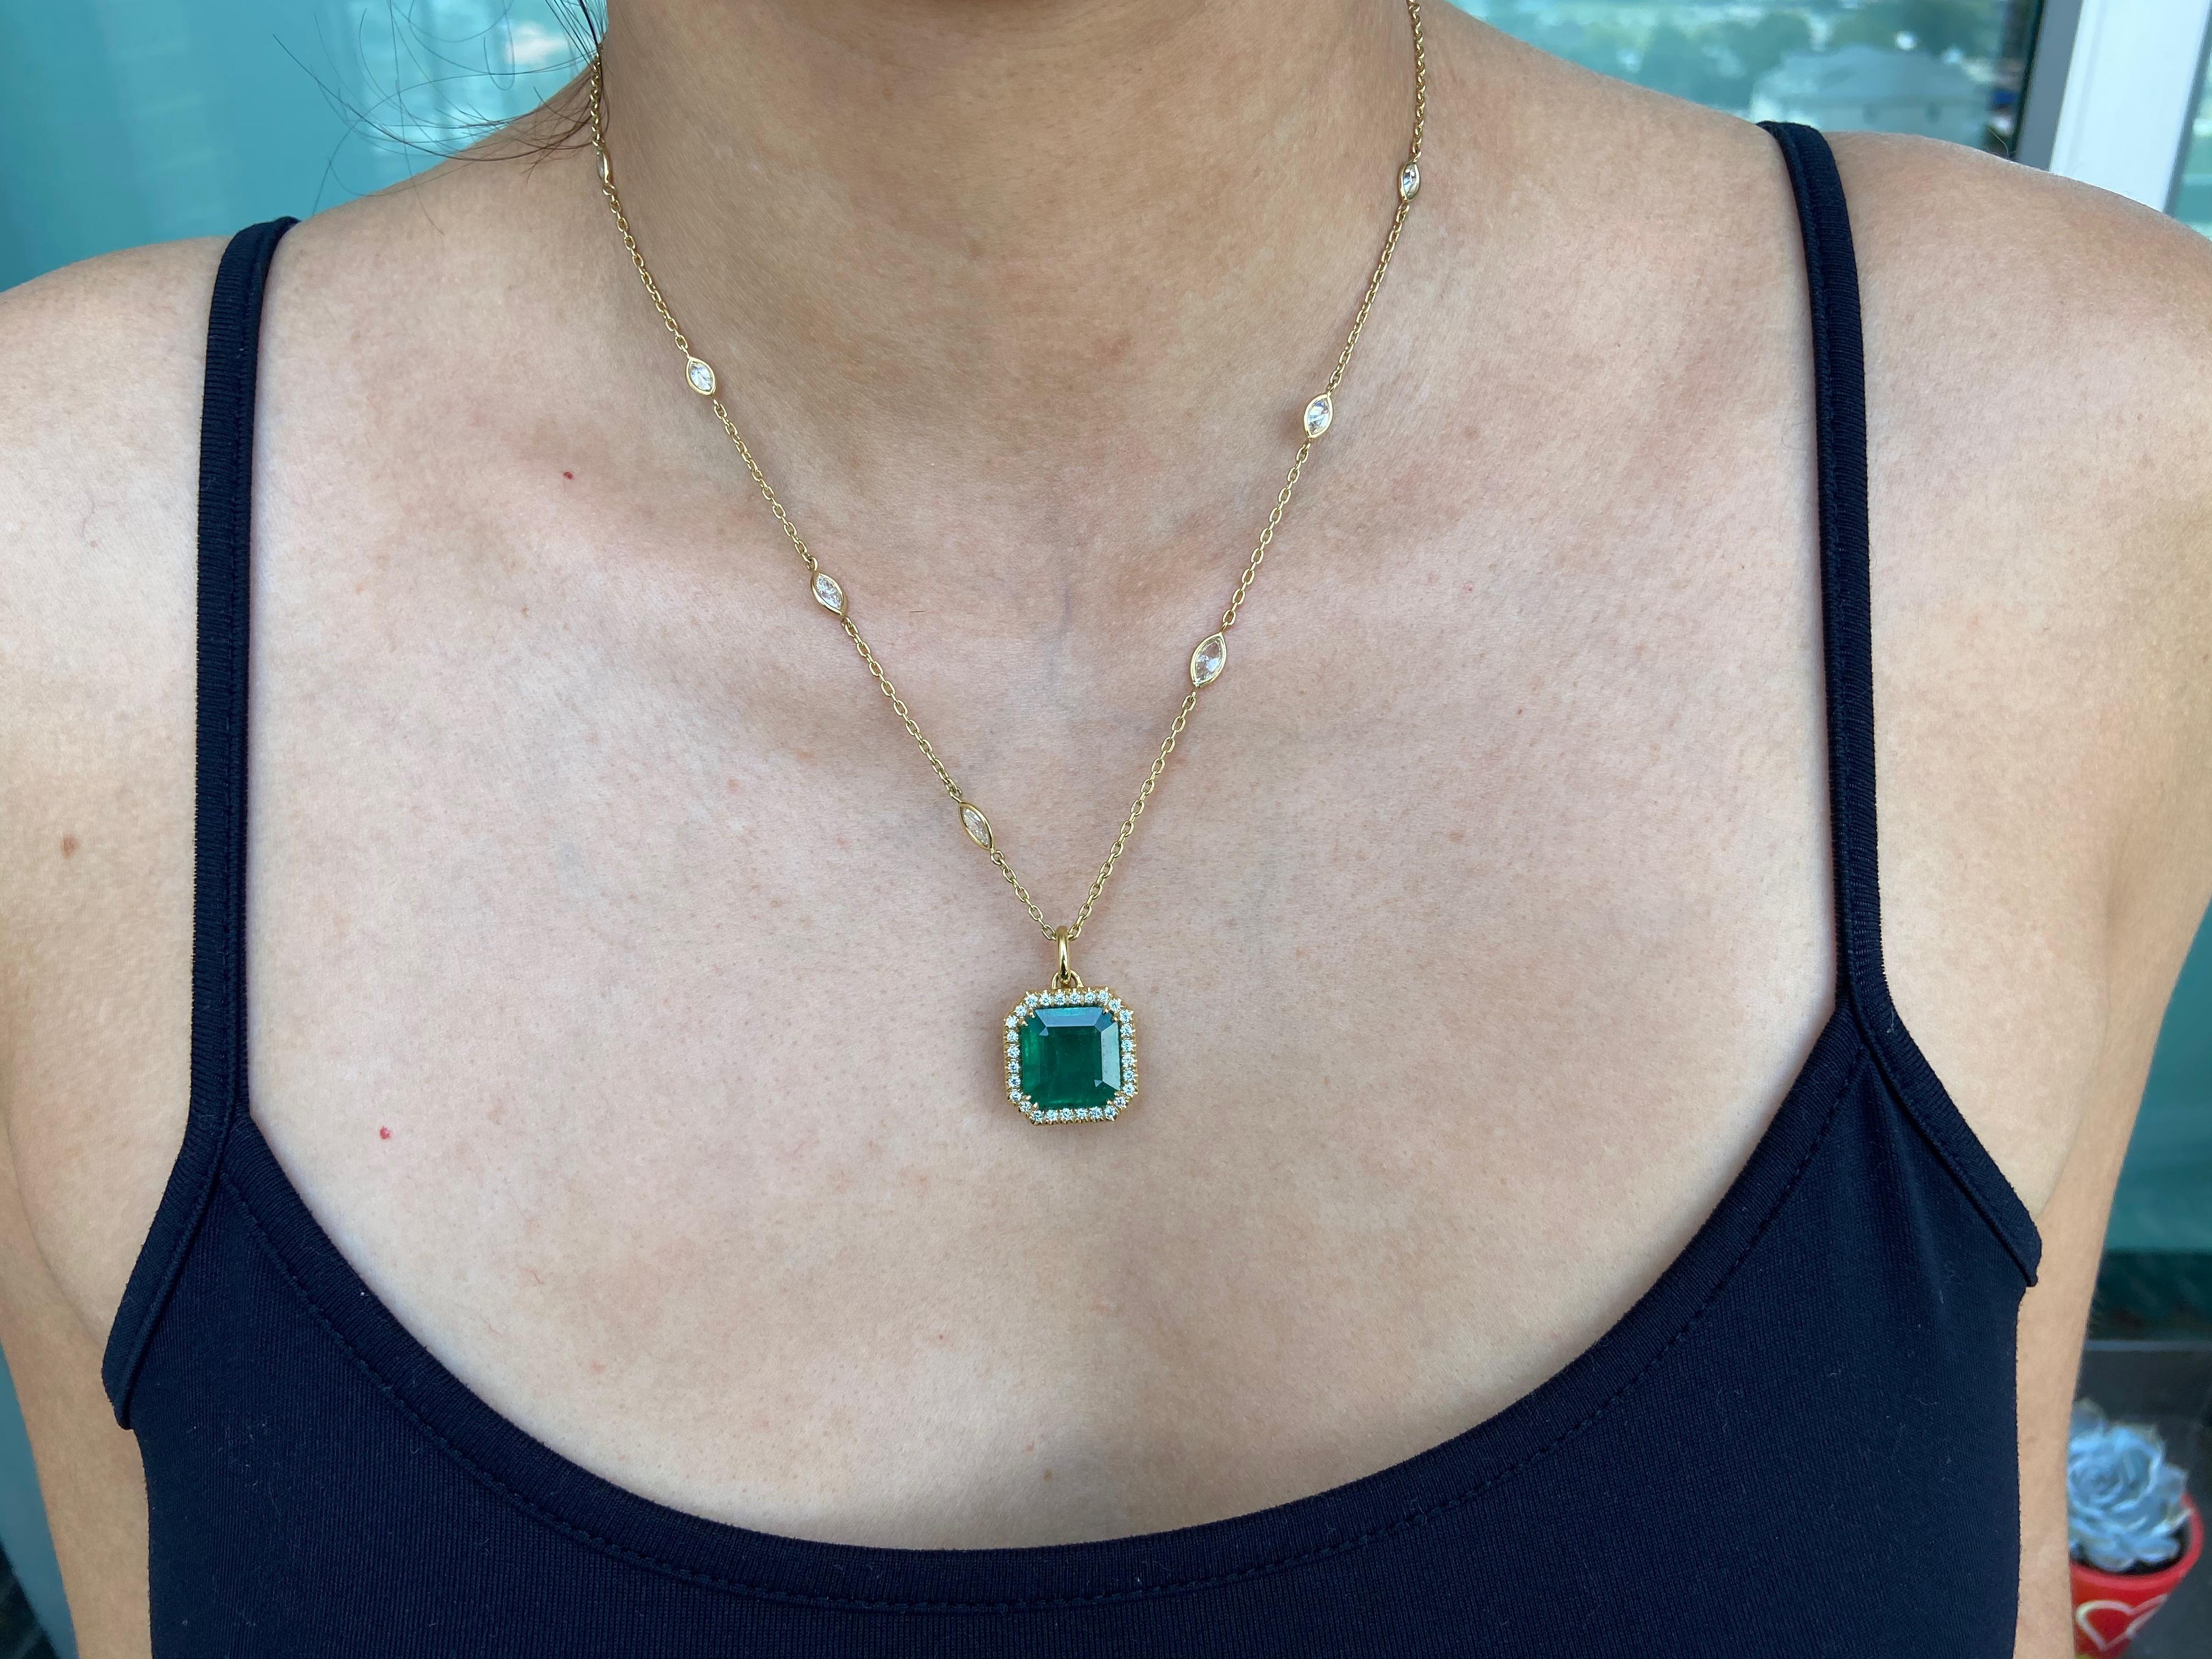 Stunning 18k yellow gold necklace featuring a vibrant green 11.13 carat Zambian emerald and additional 3 carats of diamonds. 
18